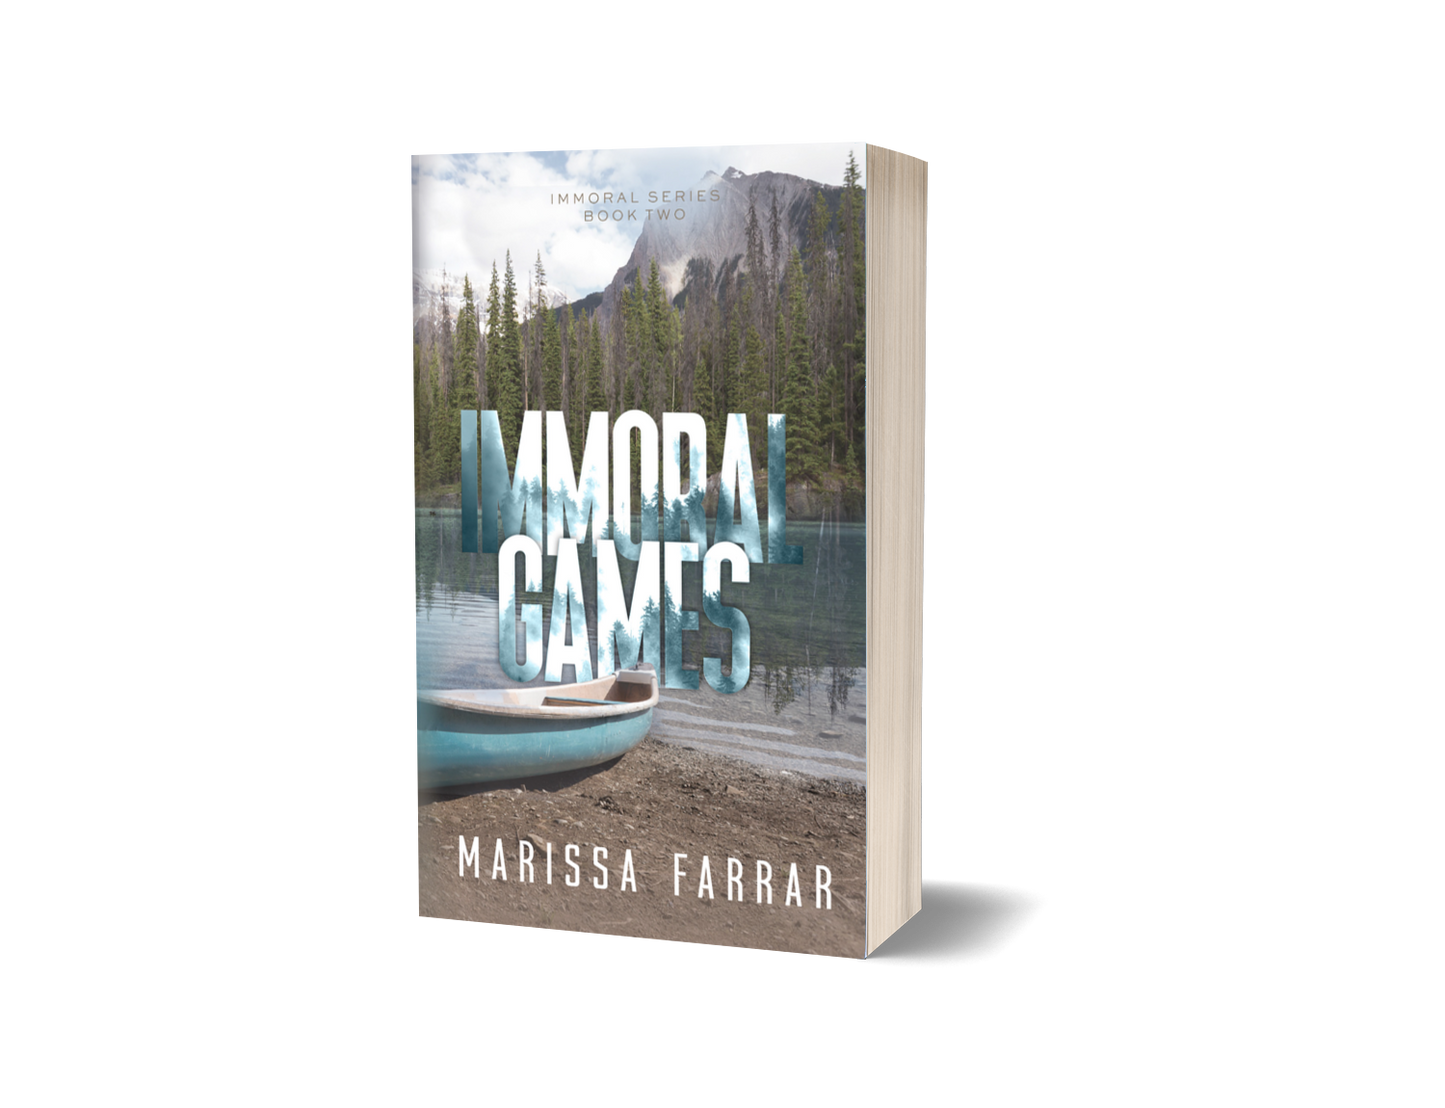 Immoral Games paperback, print, soft cover,  signed, discreet cover why choose Marissa Farrar